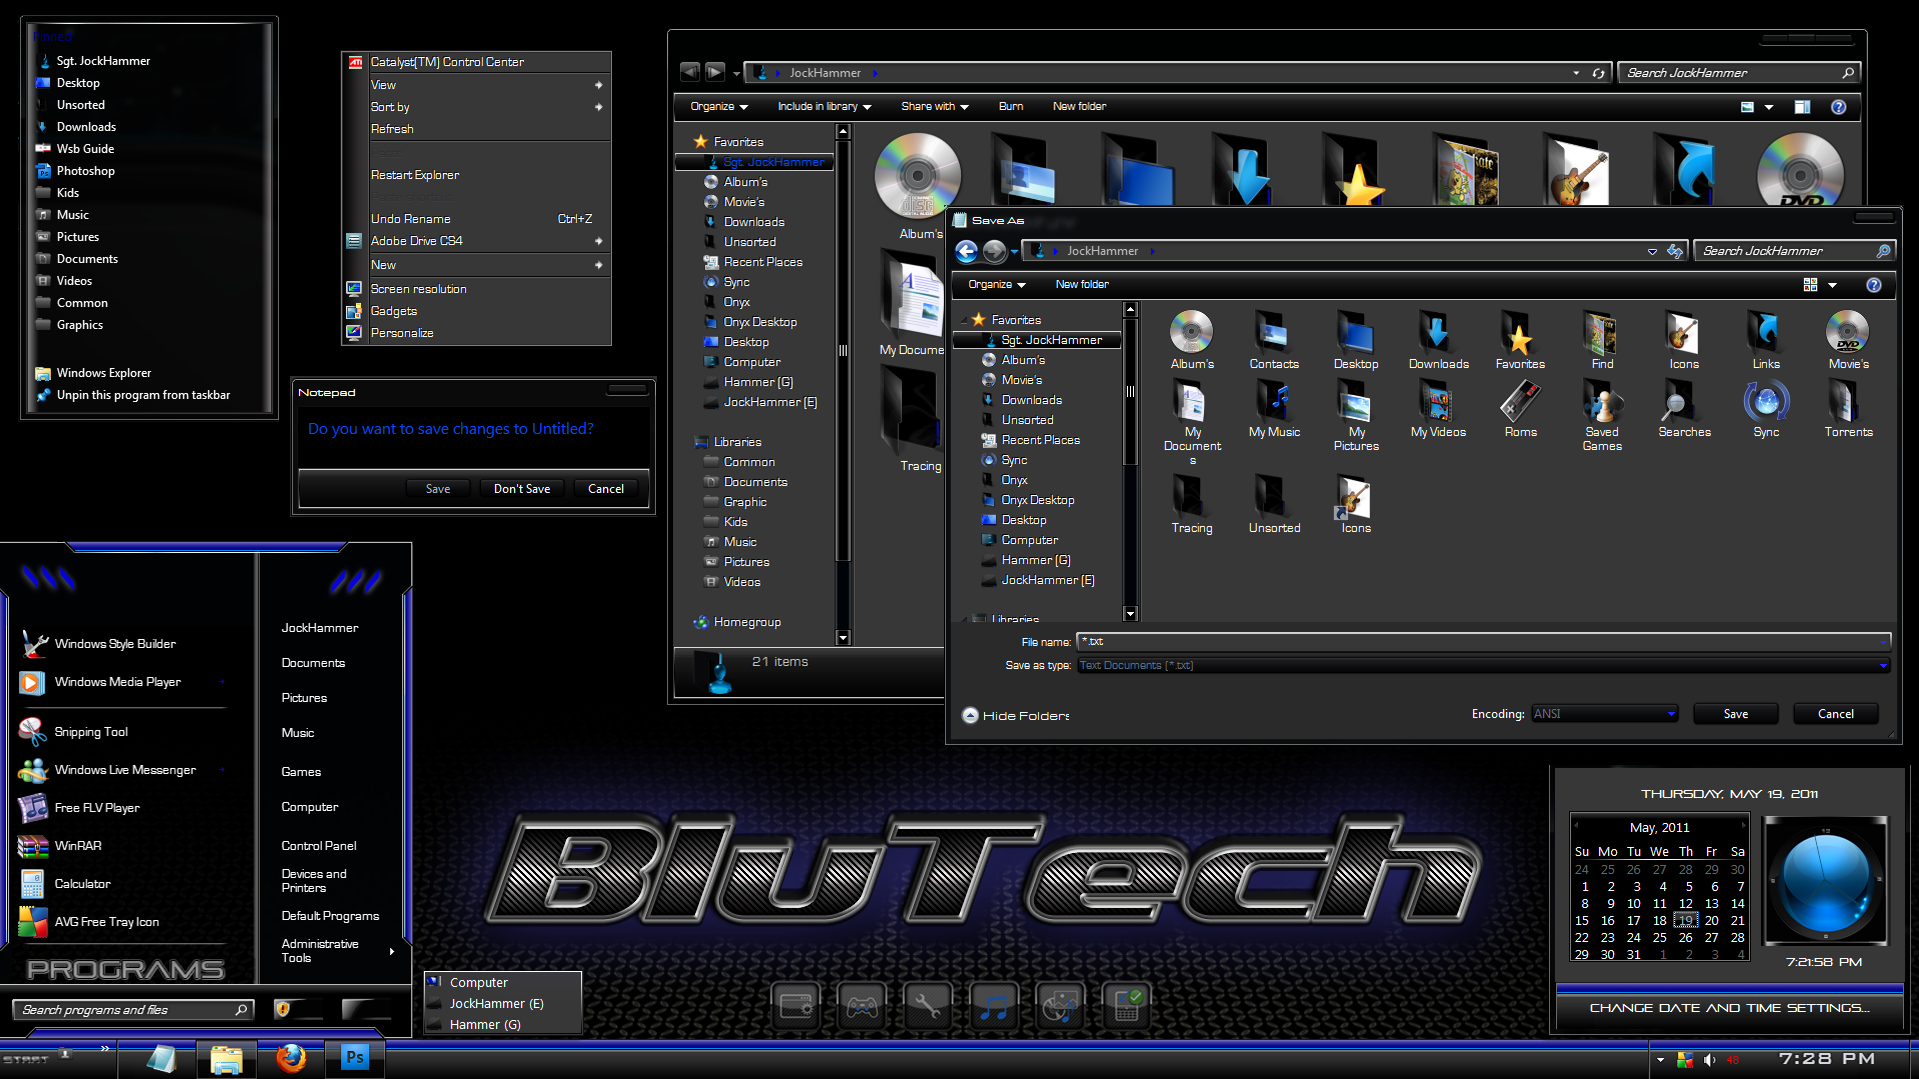 Windows 7 themes 3d fully customized 2011 free download